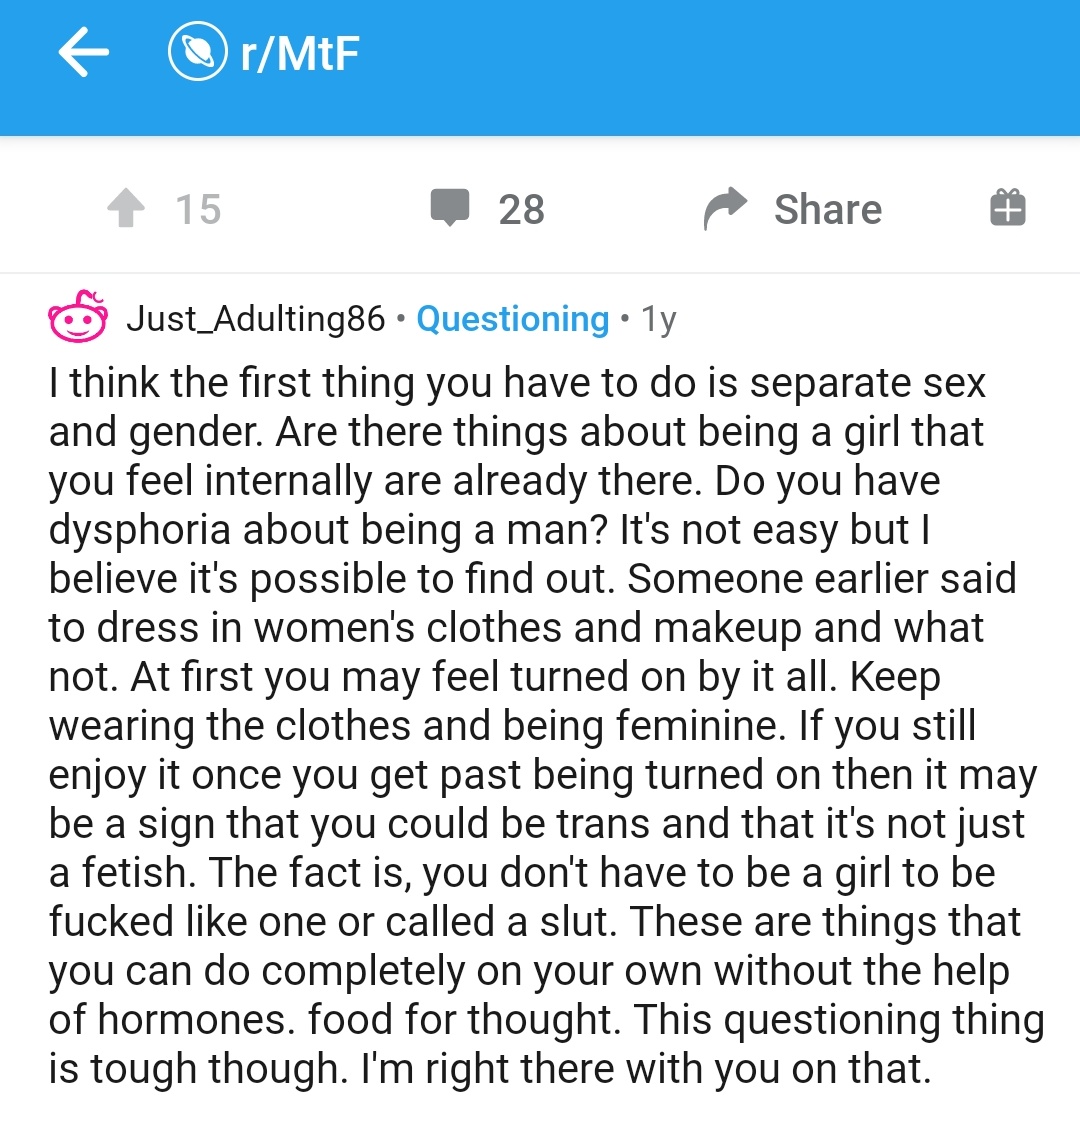 "I worry that I'm not actually trans but just want to be a slut""Wanting to be dominated and called a slut does not invalidate your gender""You don't have to be a girl to be fucked like one or called a slut"